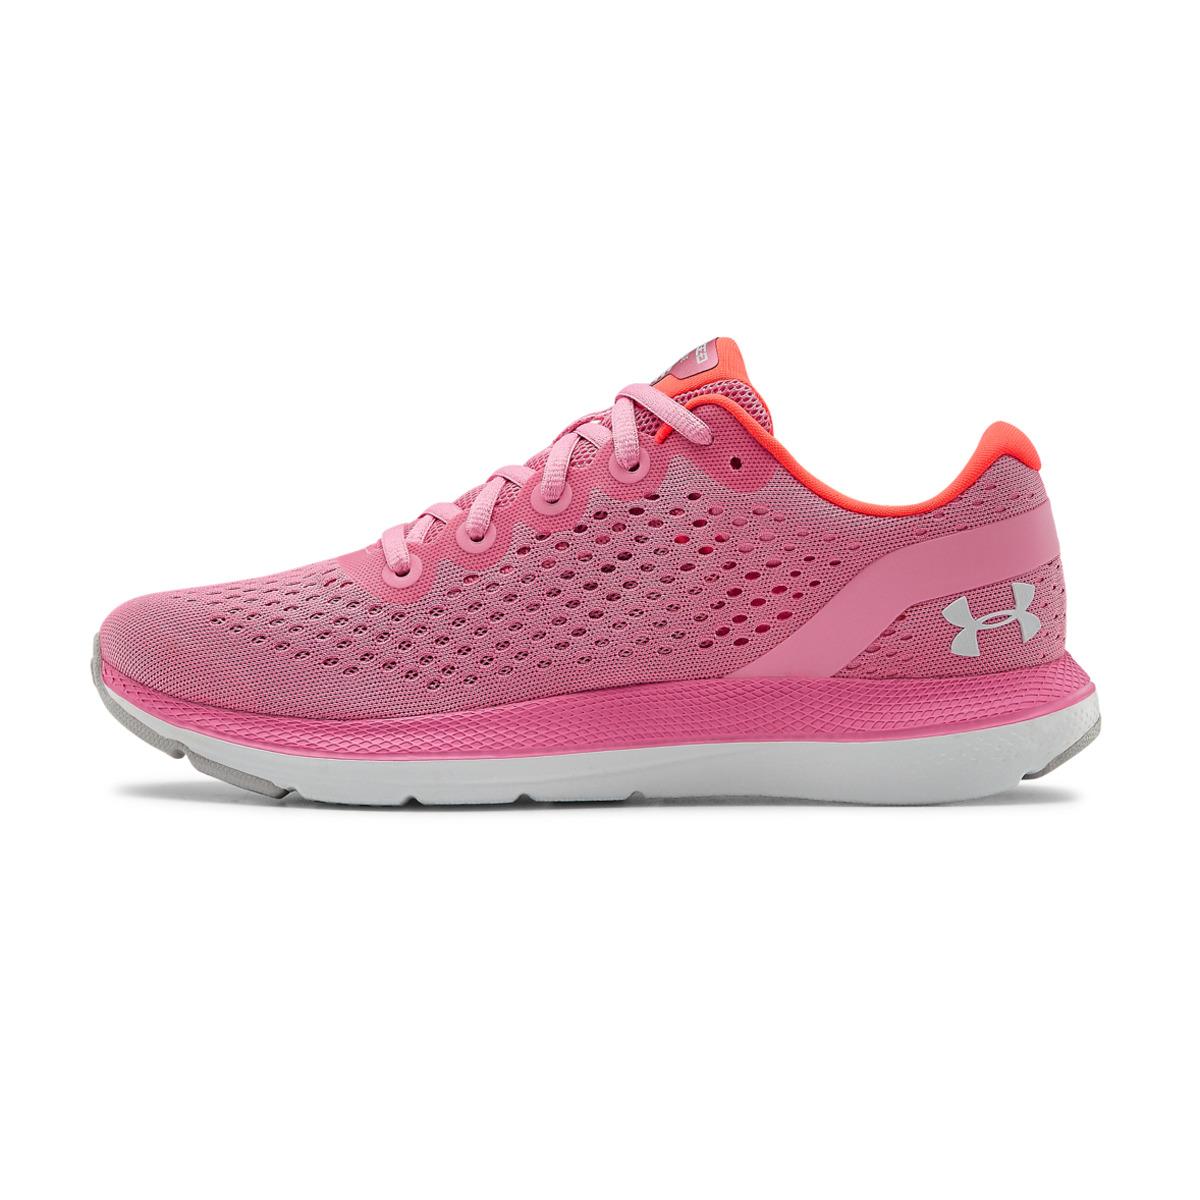 Under Armour Rubber Charged Impulse Running Shoes in Coral (Pink) - Lyst